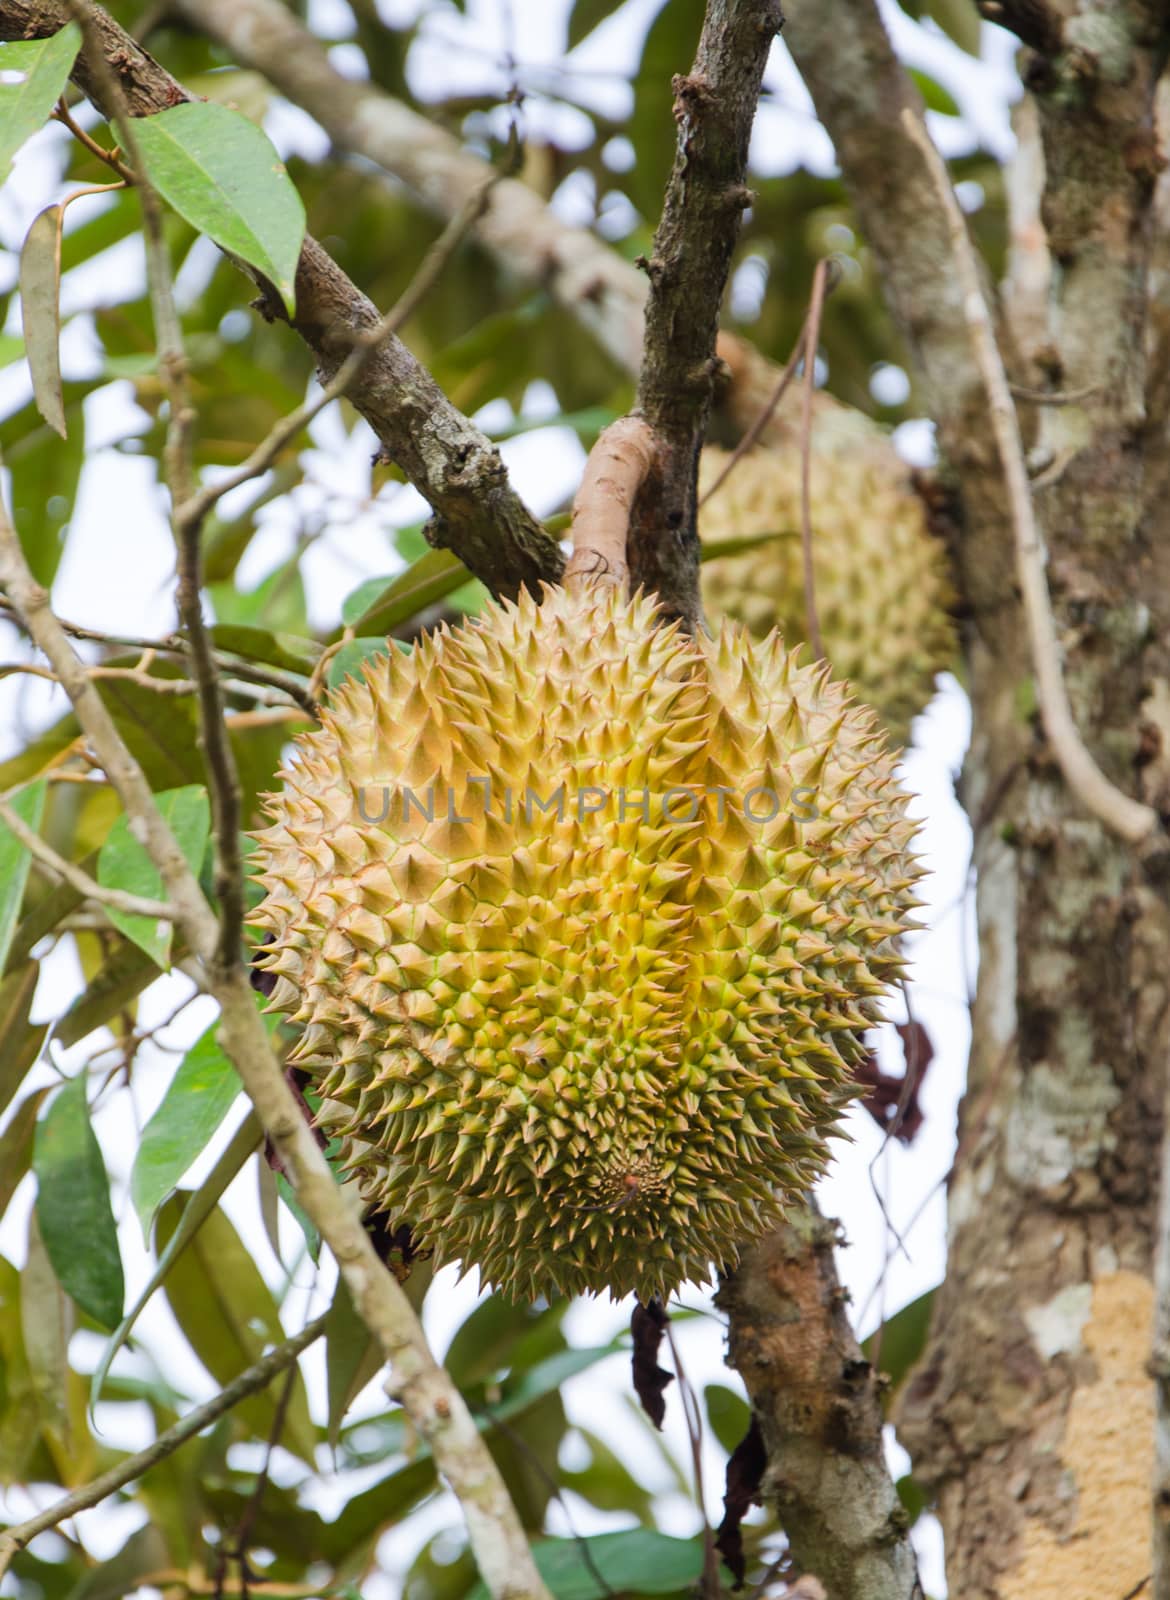 Fresh durian on its tree in the orchard